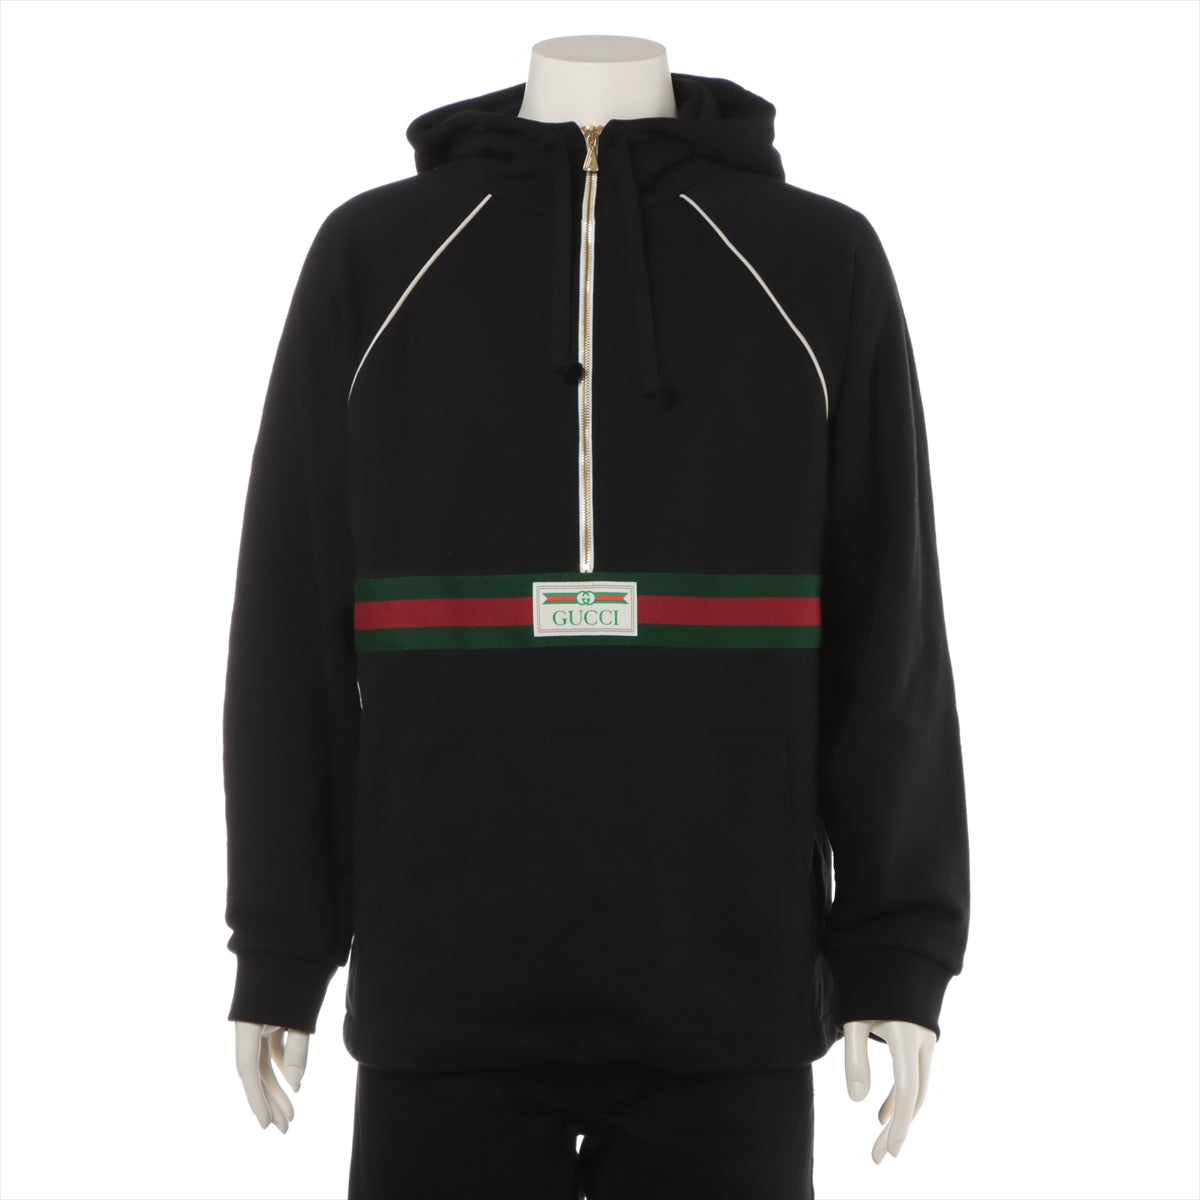 GUCCI グッチ ジップアップパーカー 18 24m 【SEAL限定商品】 - トップス